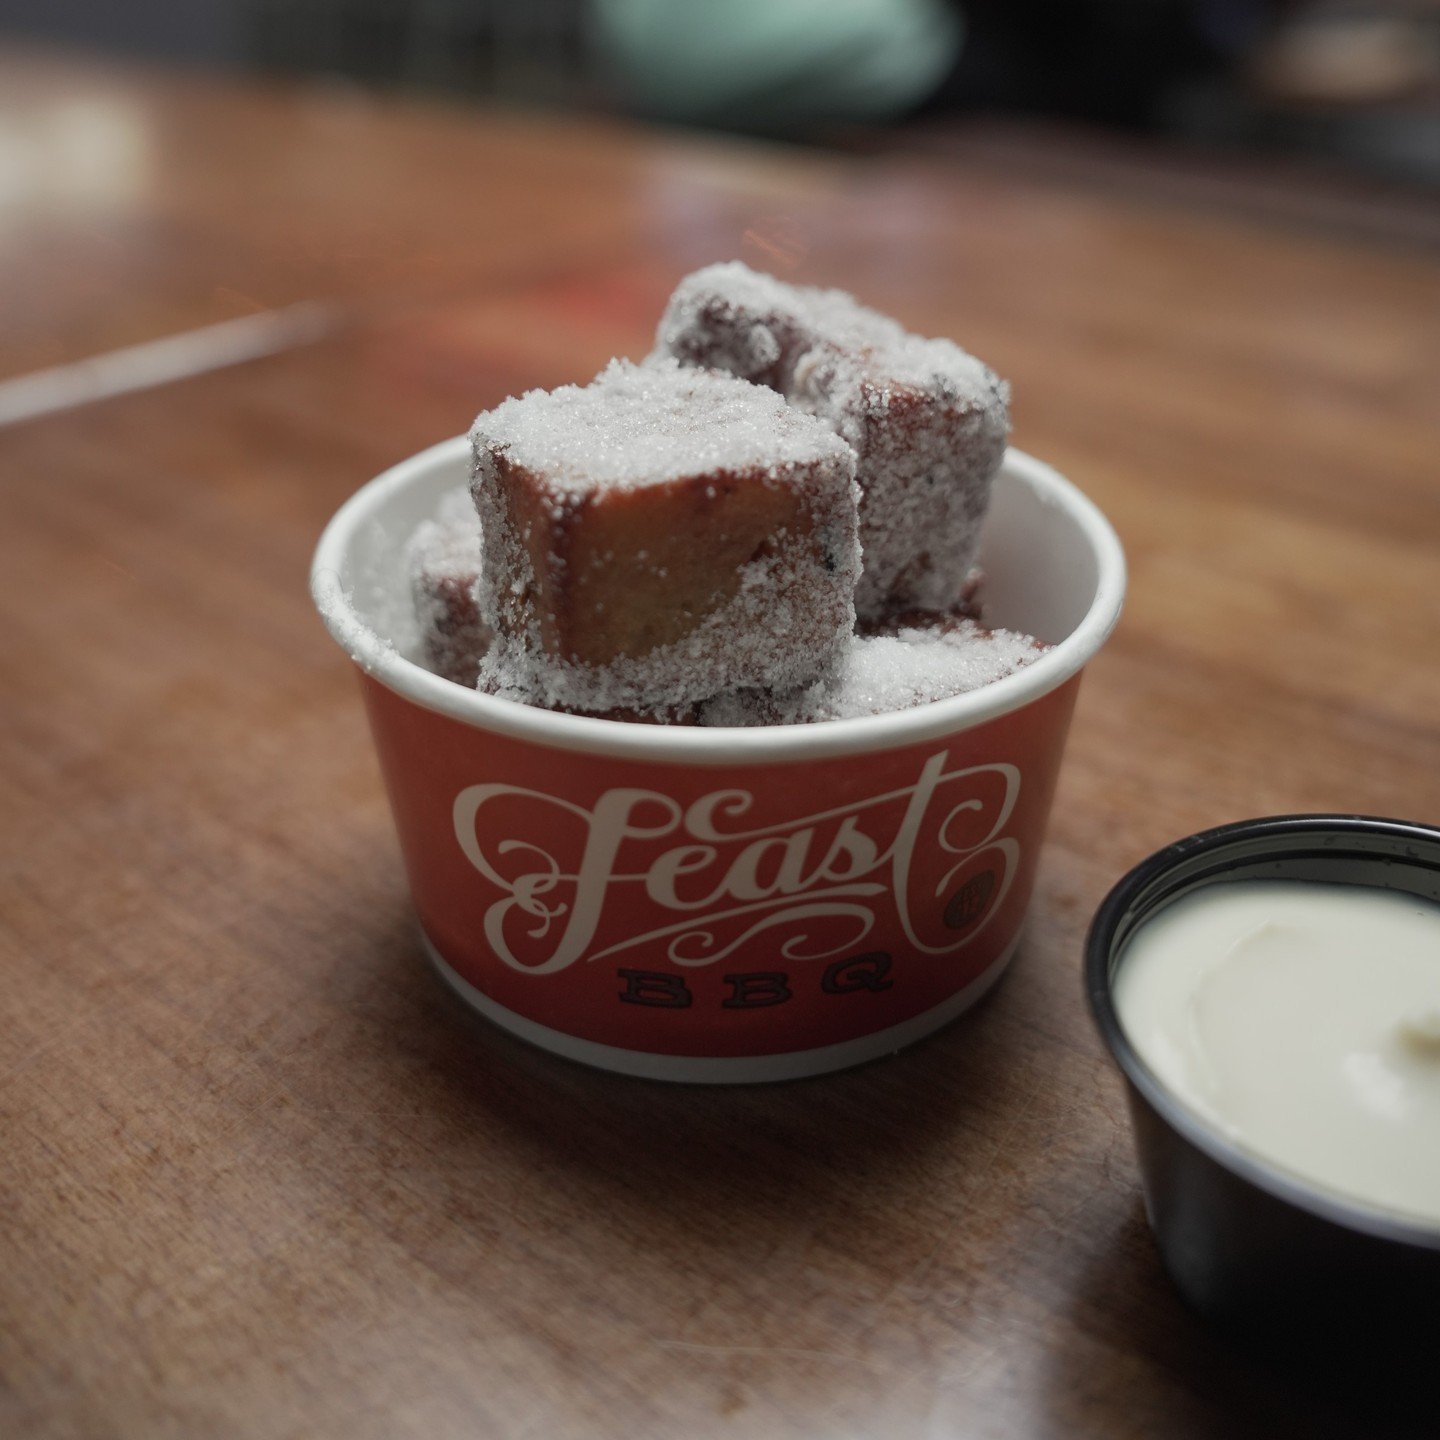 Trust us, you're going to want to save room for dessert. 😋 Reverend Rogers White Chocolate Bread Pudding Sticks are the perfect way to end your meal at Feast on a sweet note.